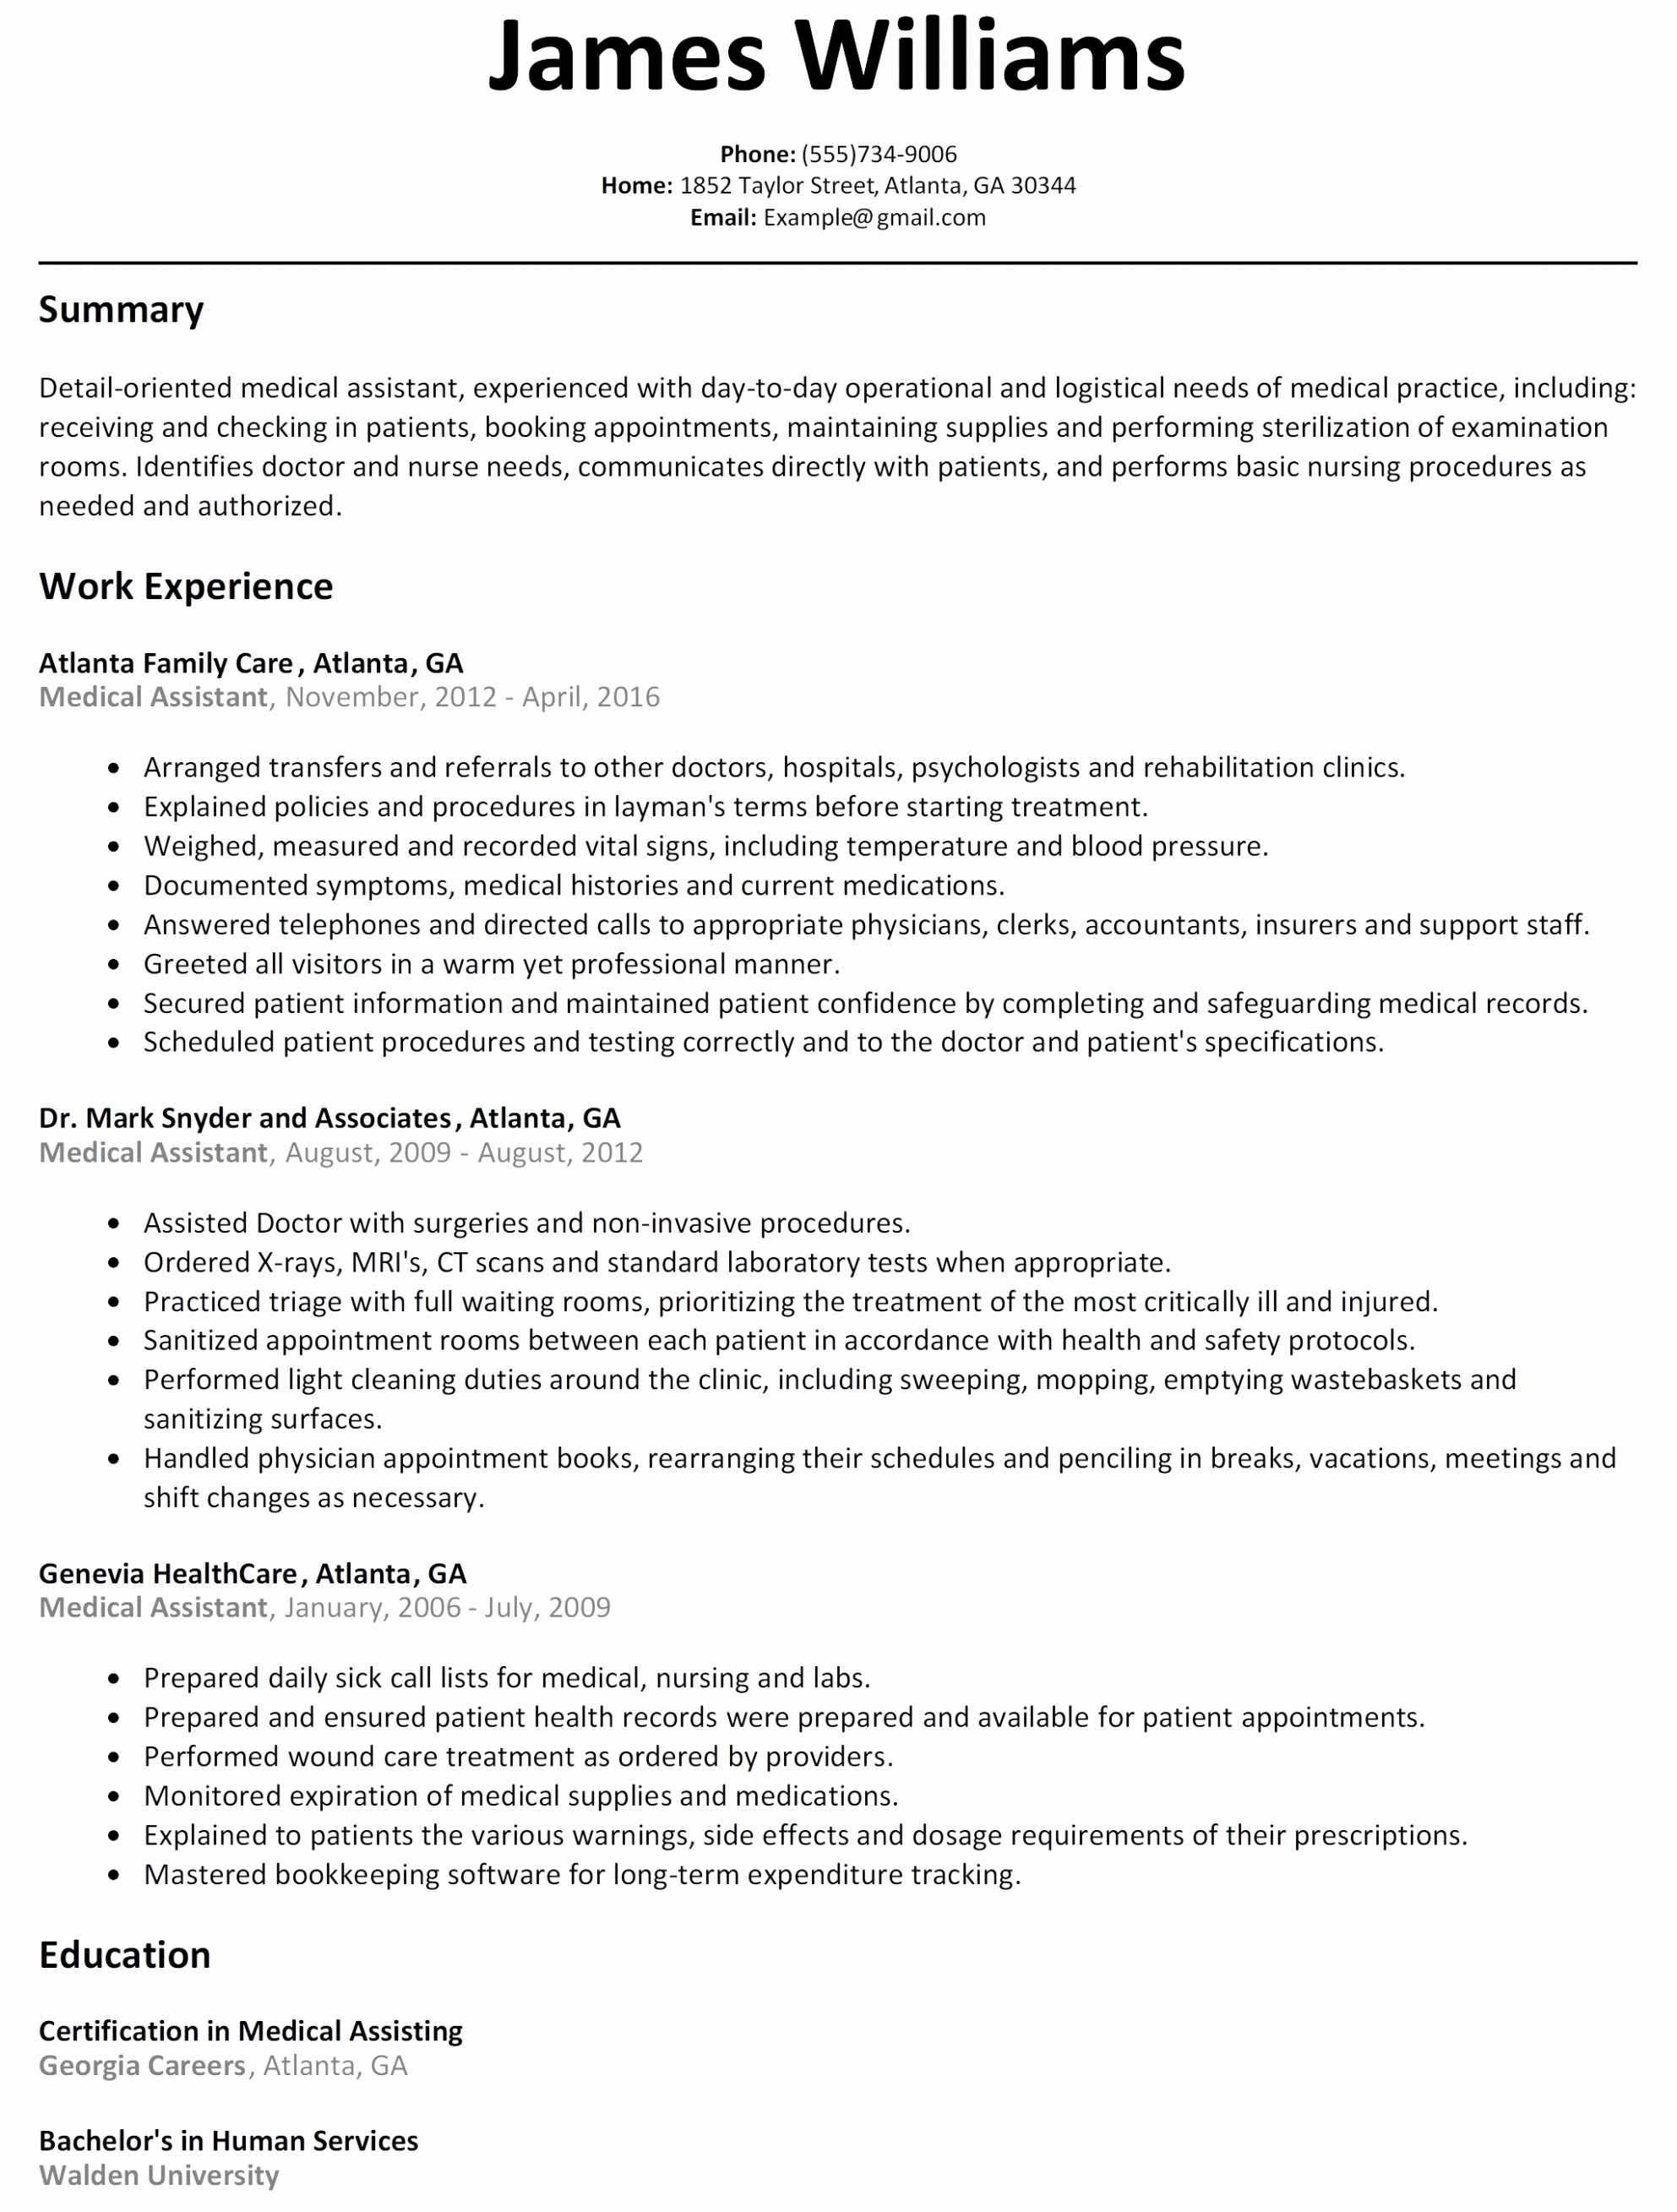 Resume Objective Examples  Event Planner Resume Sample New Resume Objective Examples Event